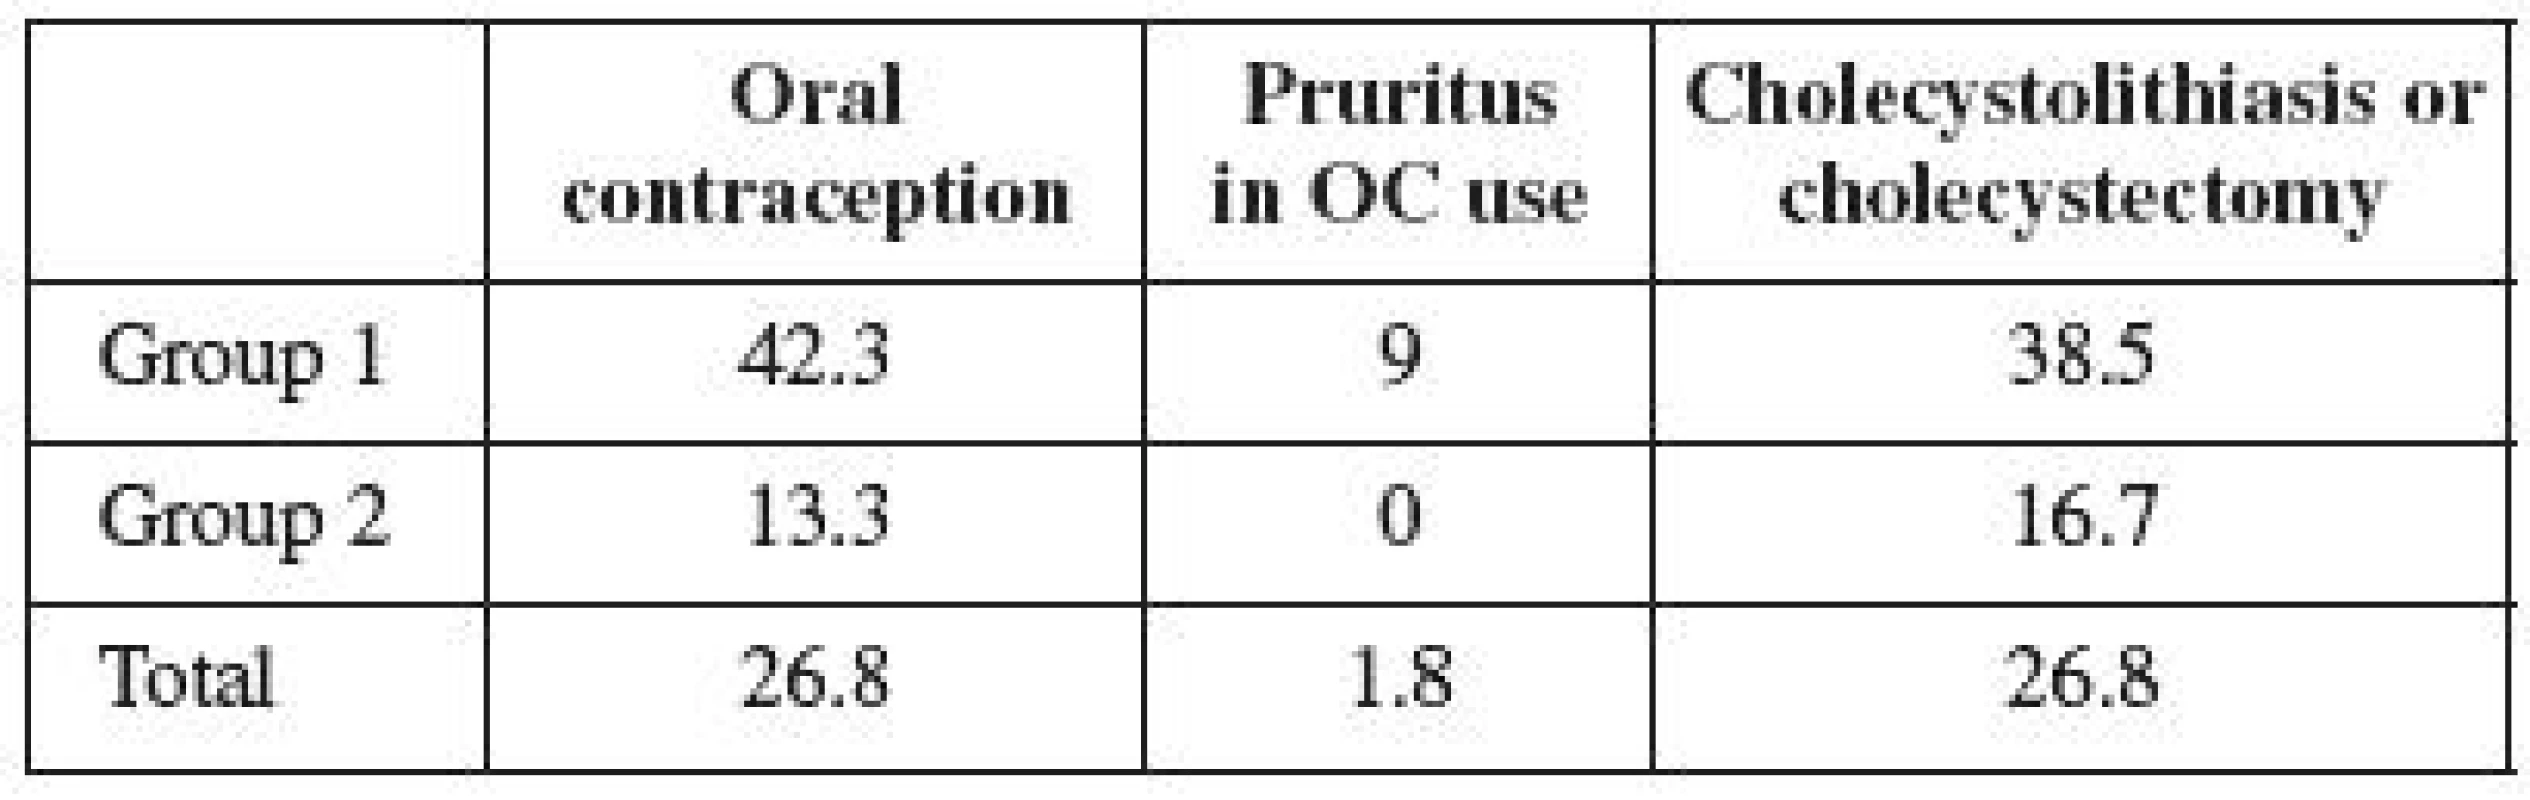 Oral contraception, pruritus and cholecystolithiasis after ICP (%)